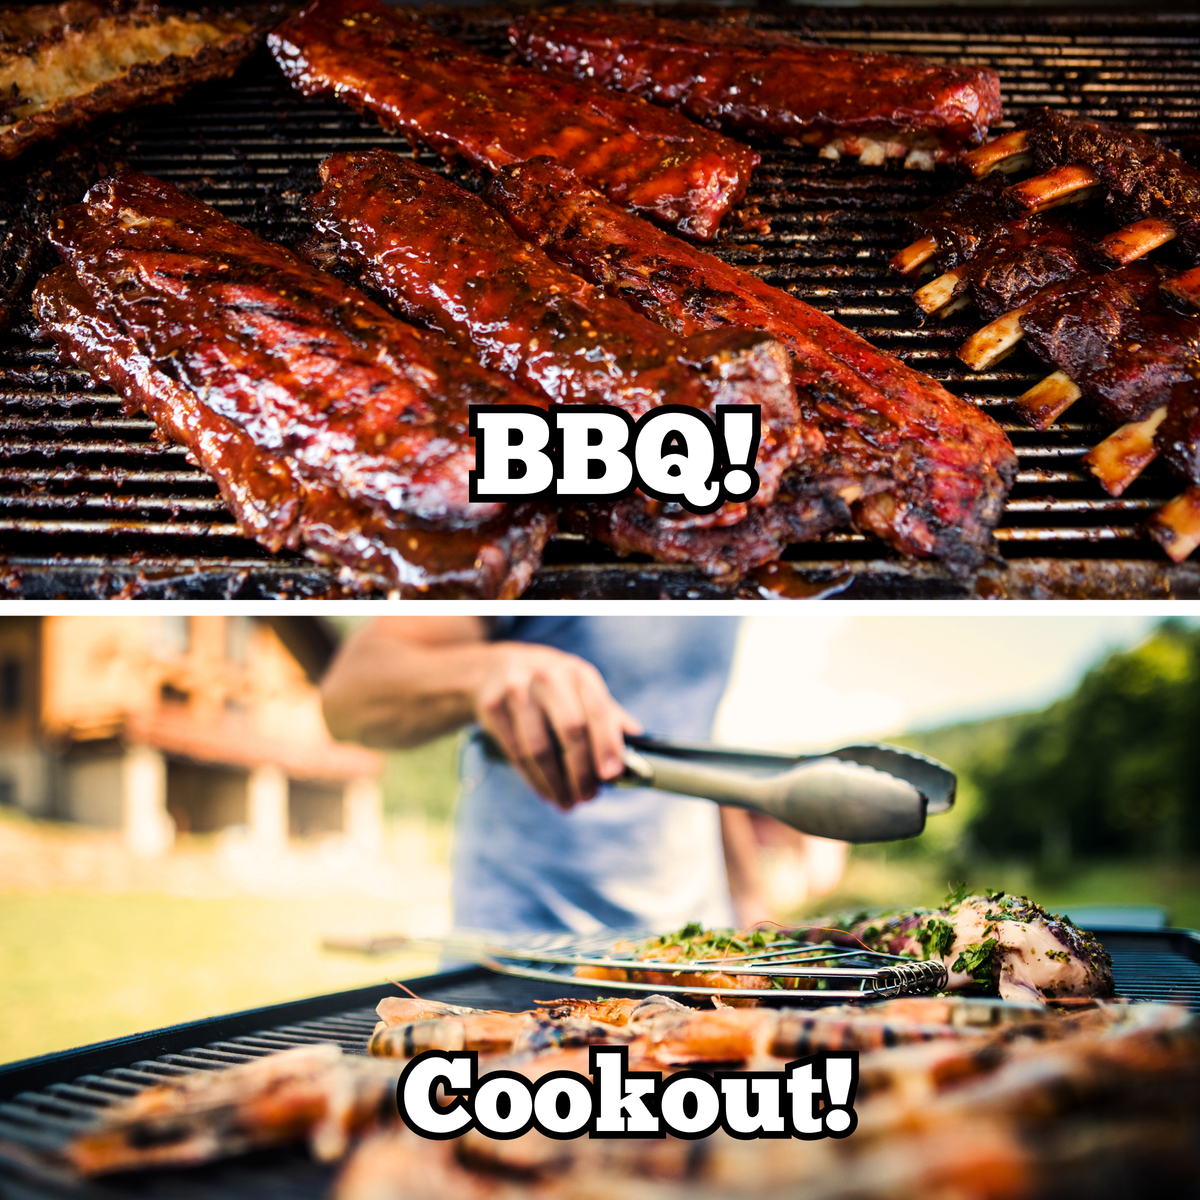 Picture of BBQ ribs and bottom picture is grilling chicken at a cookout.